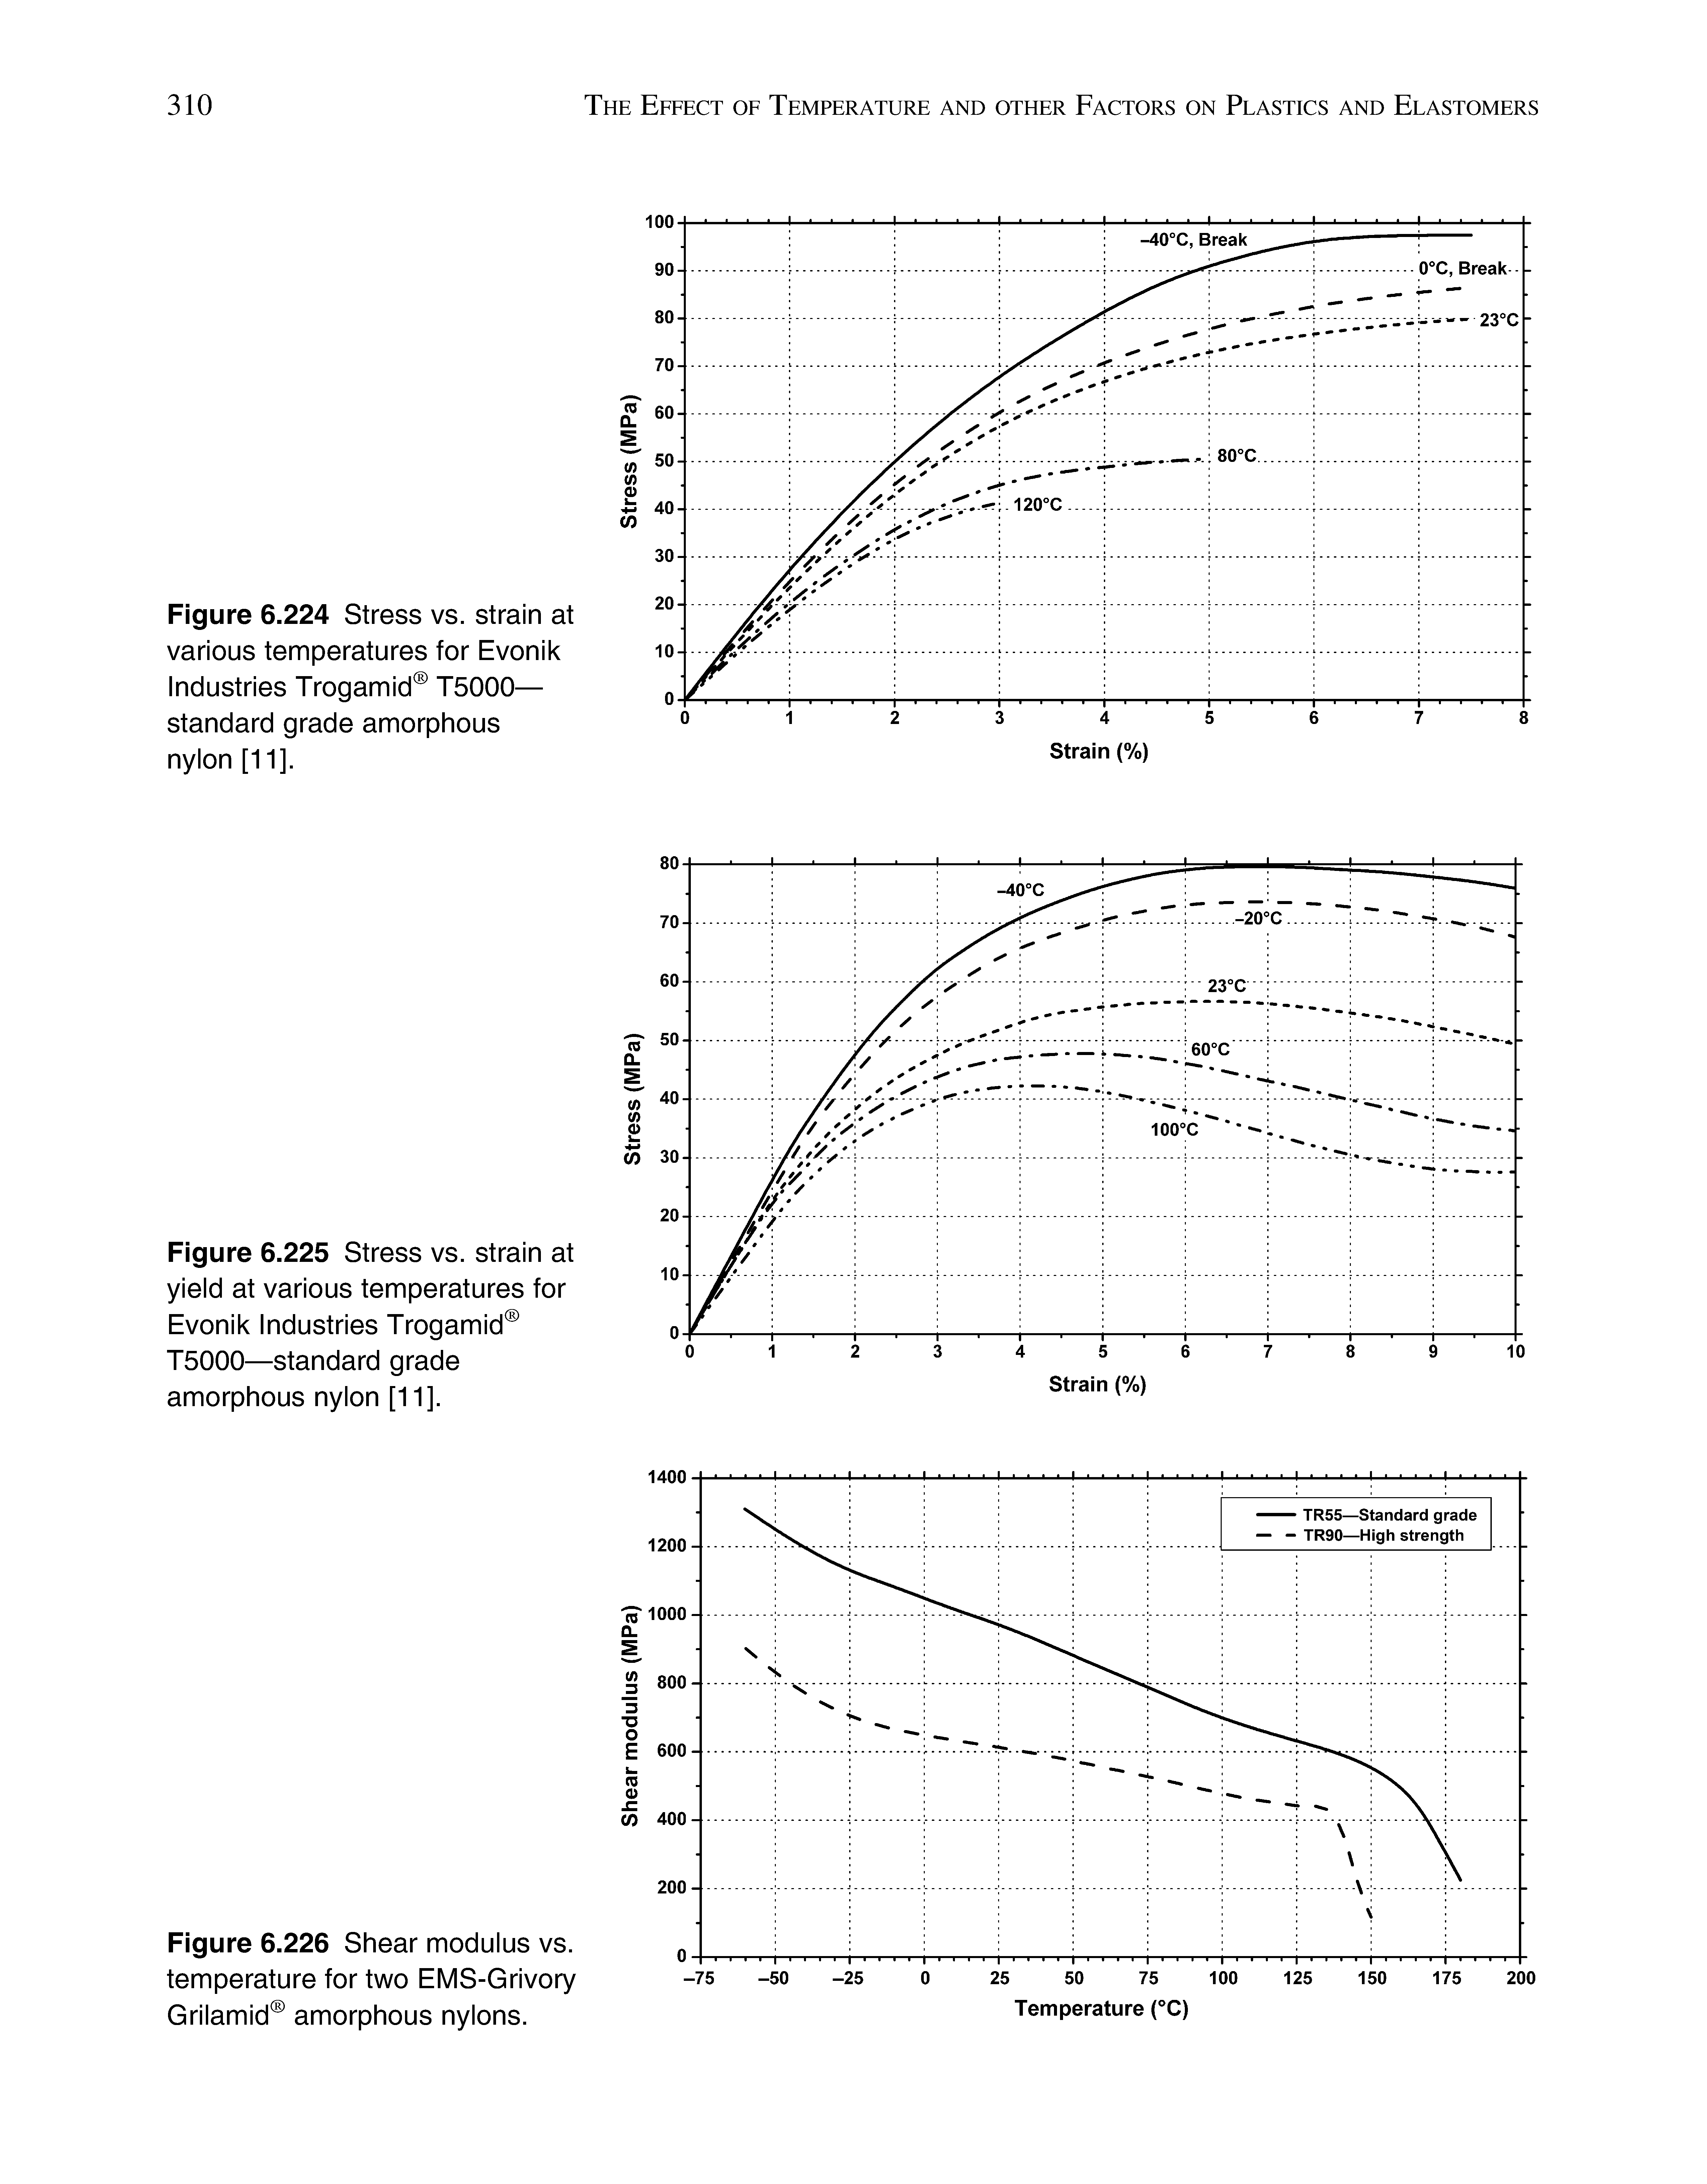 Figure 6.225 Stress vs. strain at yield at various temperatures for Evonik Industries Trogamid T5000—standard grade amorphous nylon [11].